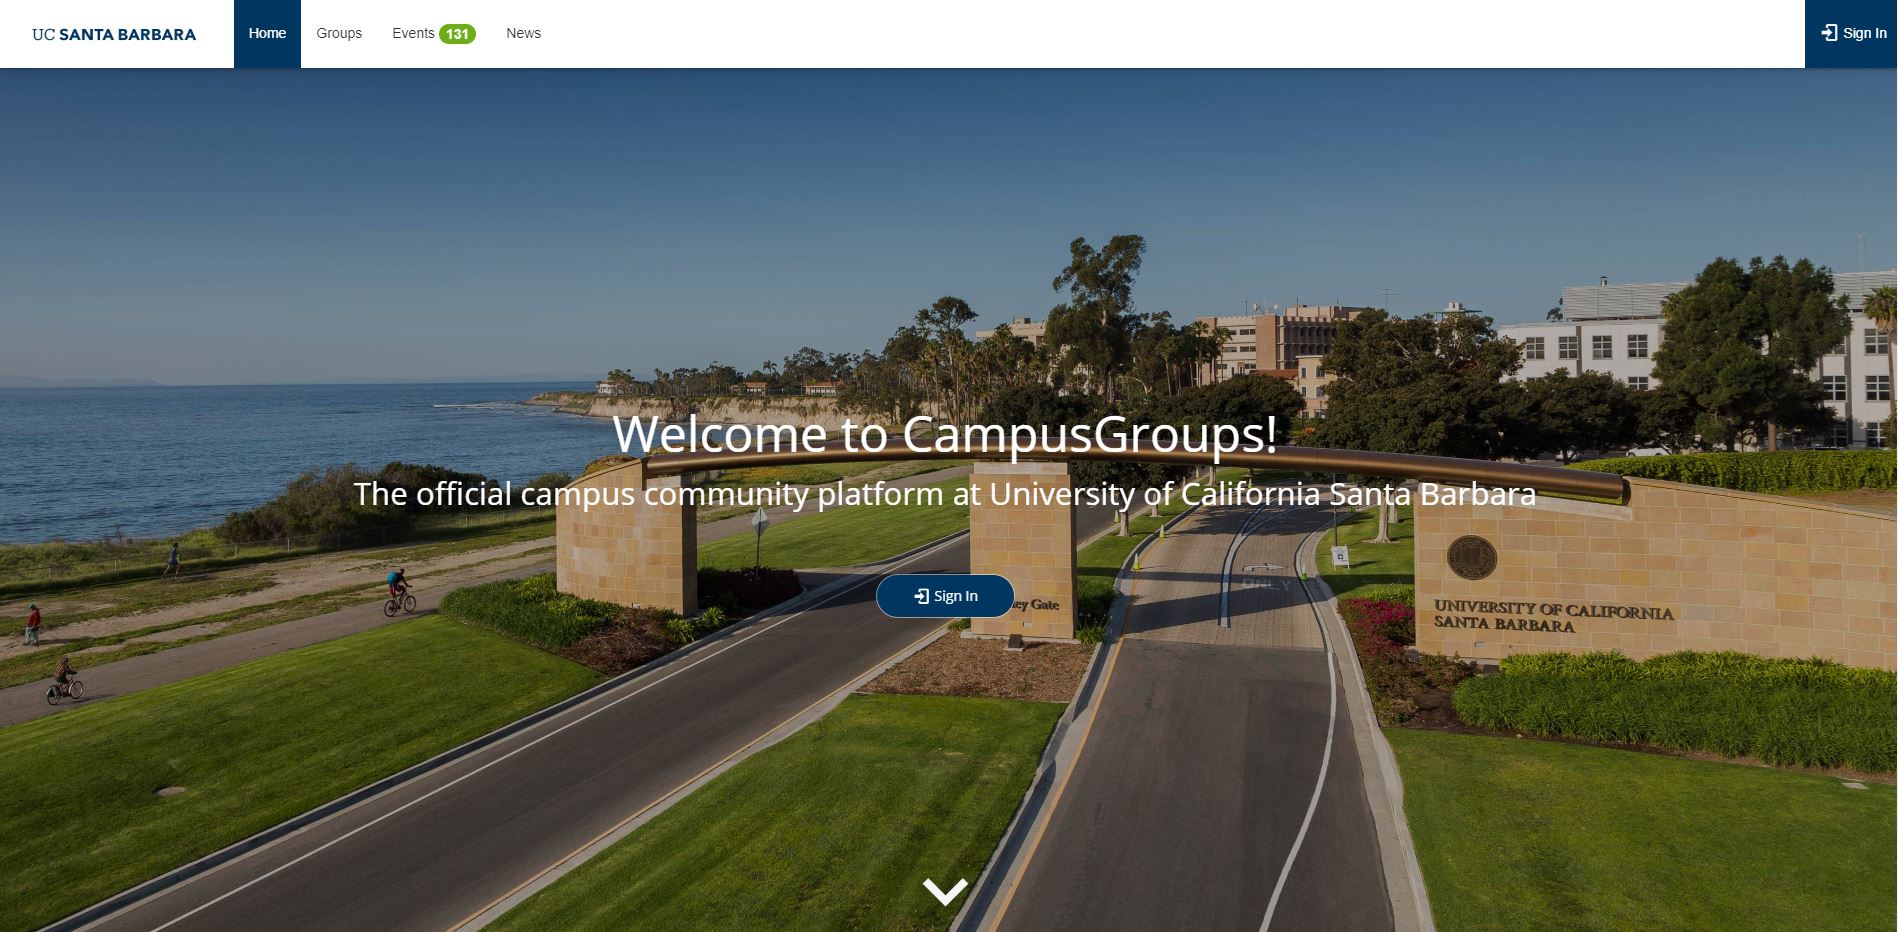 UCSB Campus Groups